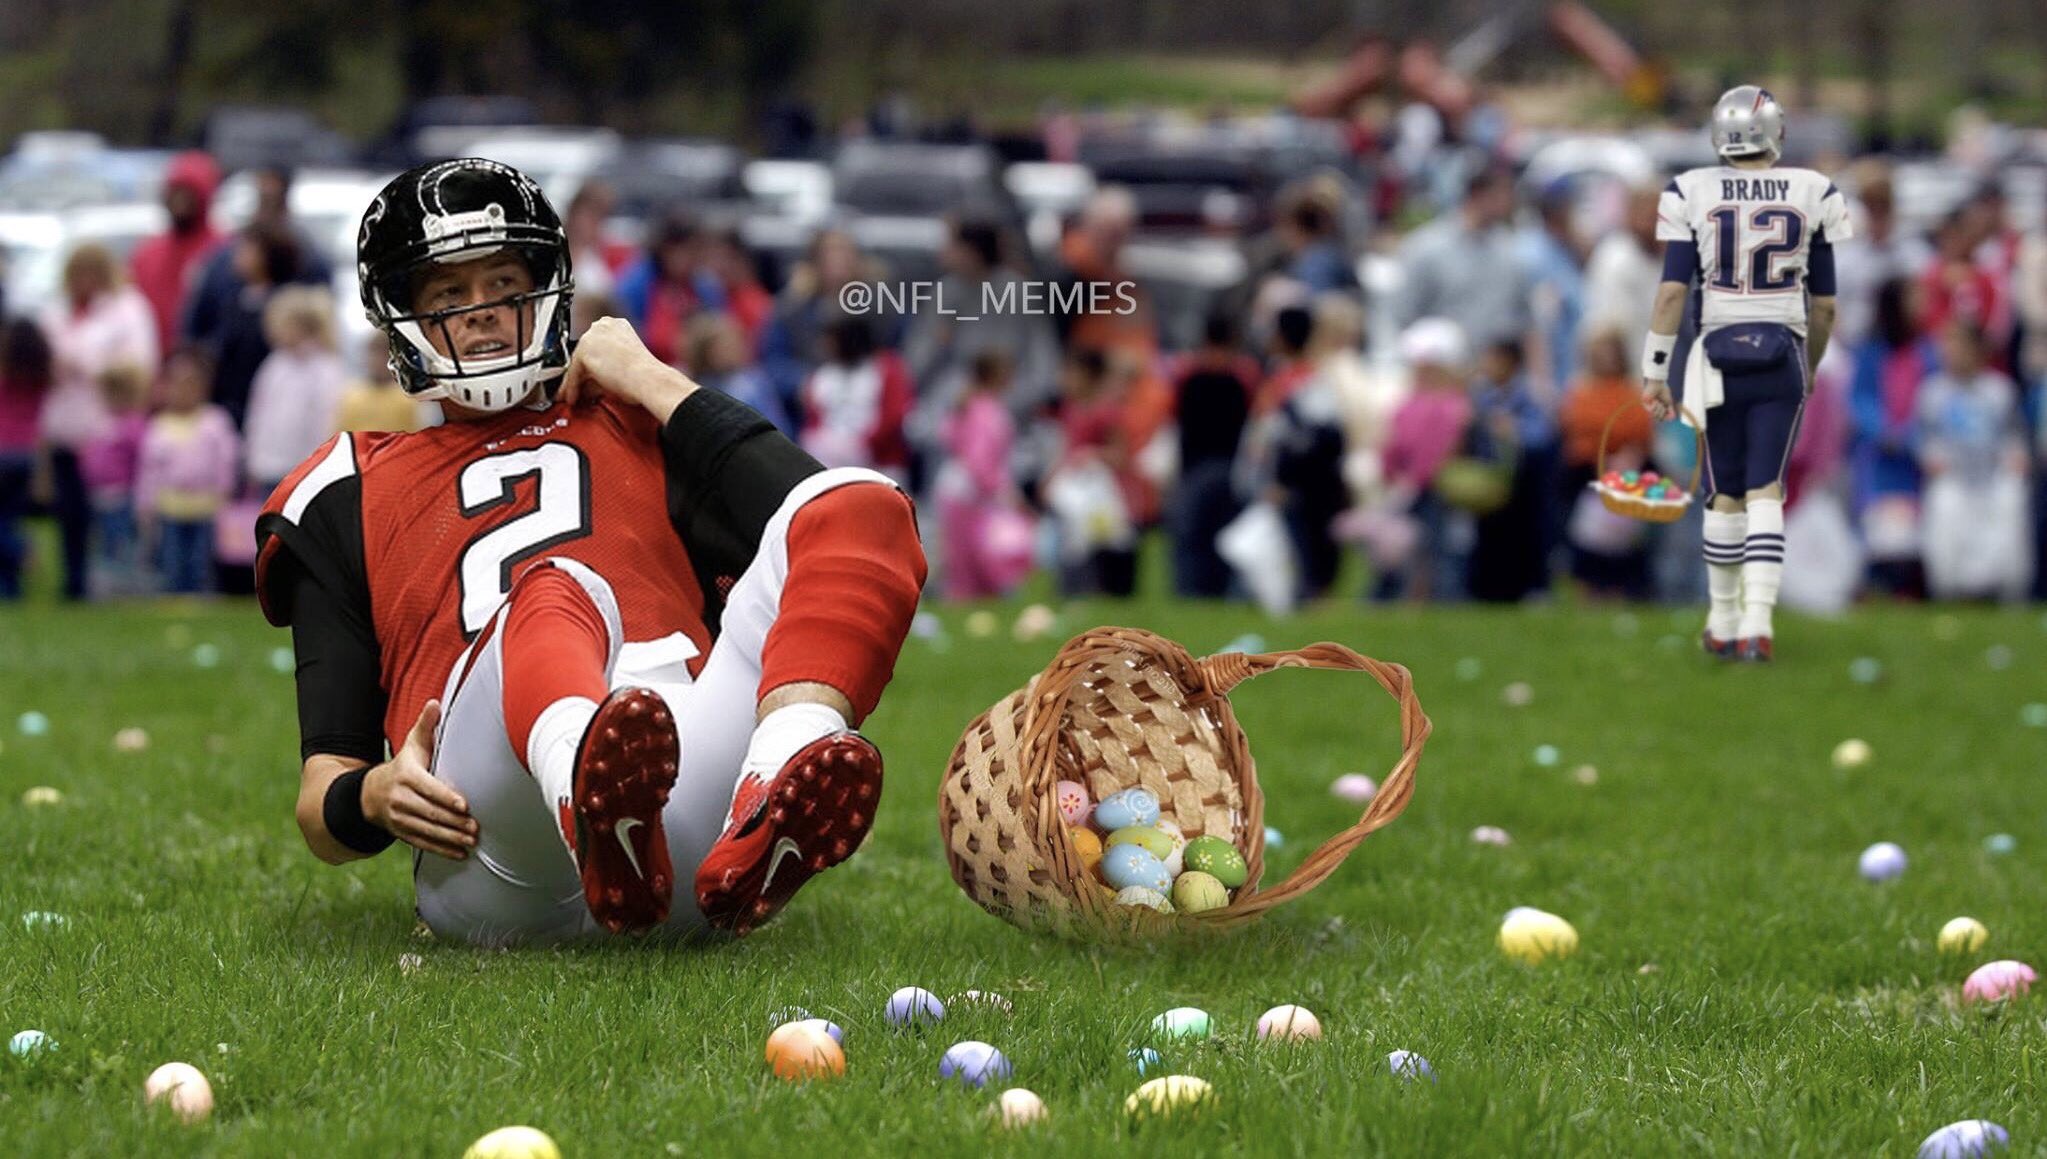 THIS JUST IN: Matt Ryan & Falcons blow 28-3 egg lead in team Easter egg ...